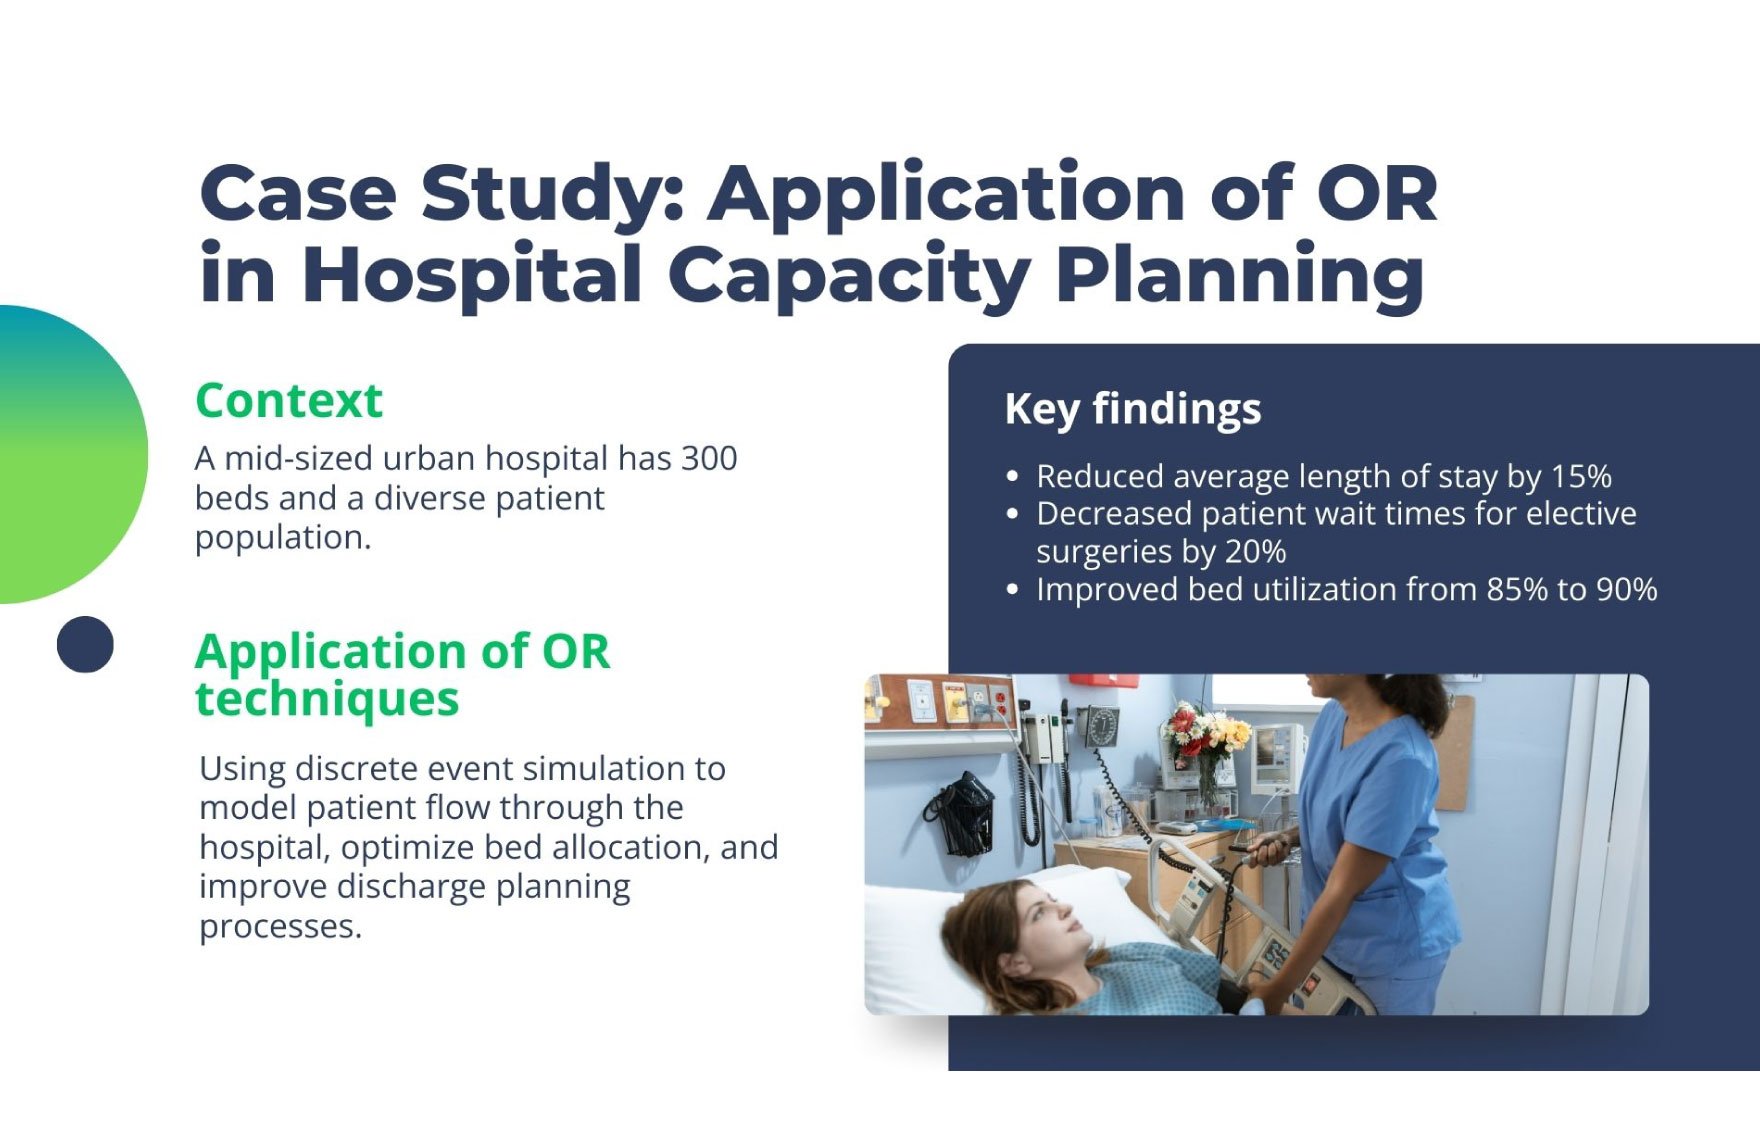 Operations Research in Healthcare PPT Template